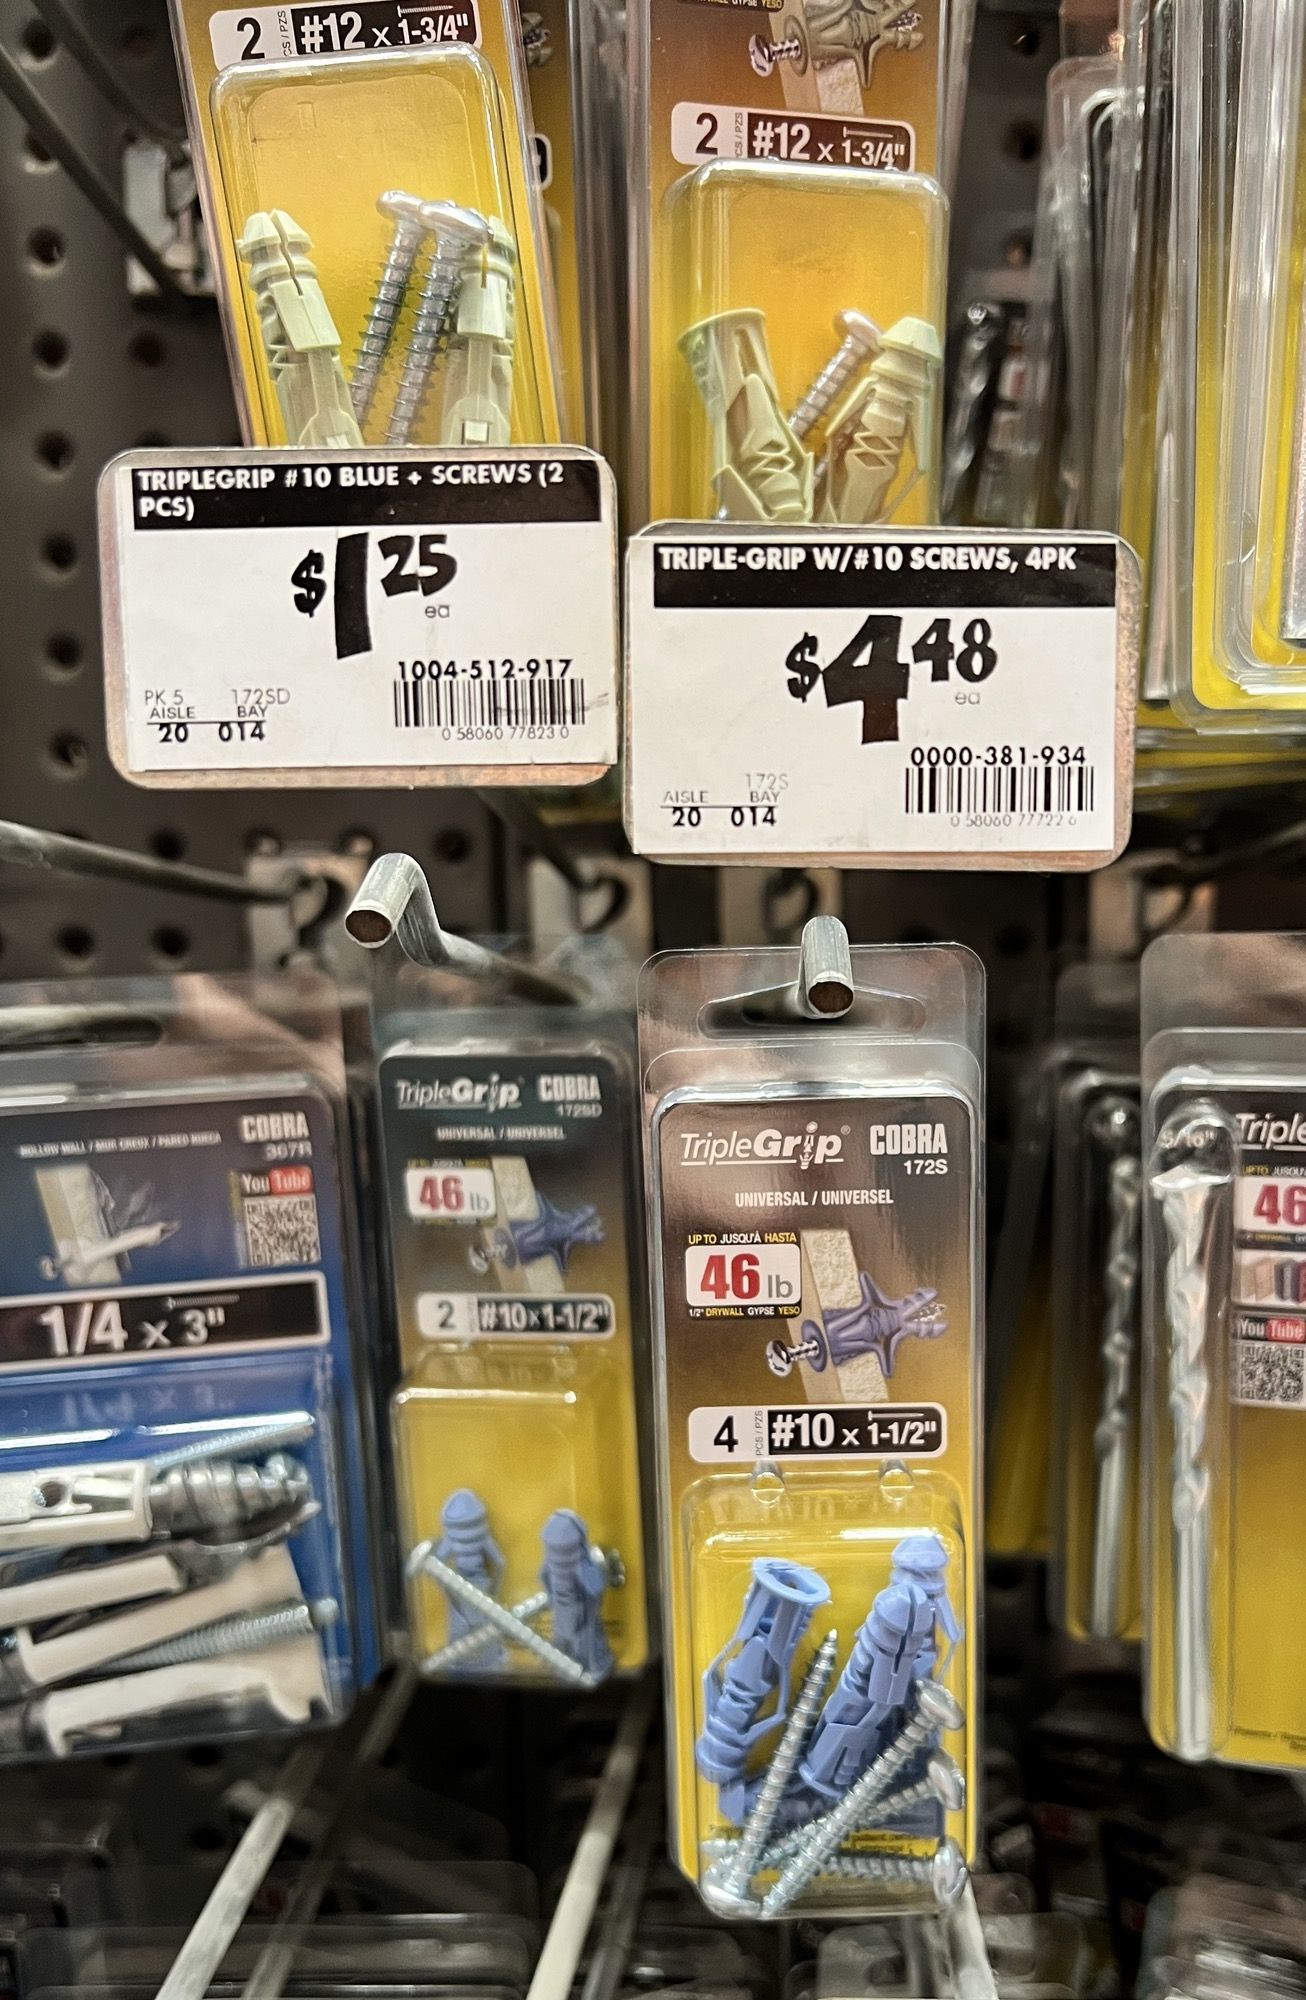 Home Depot has a $1.98 tax for not knowing math